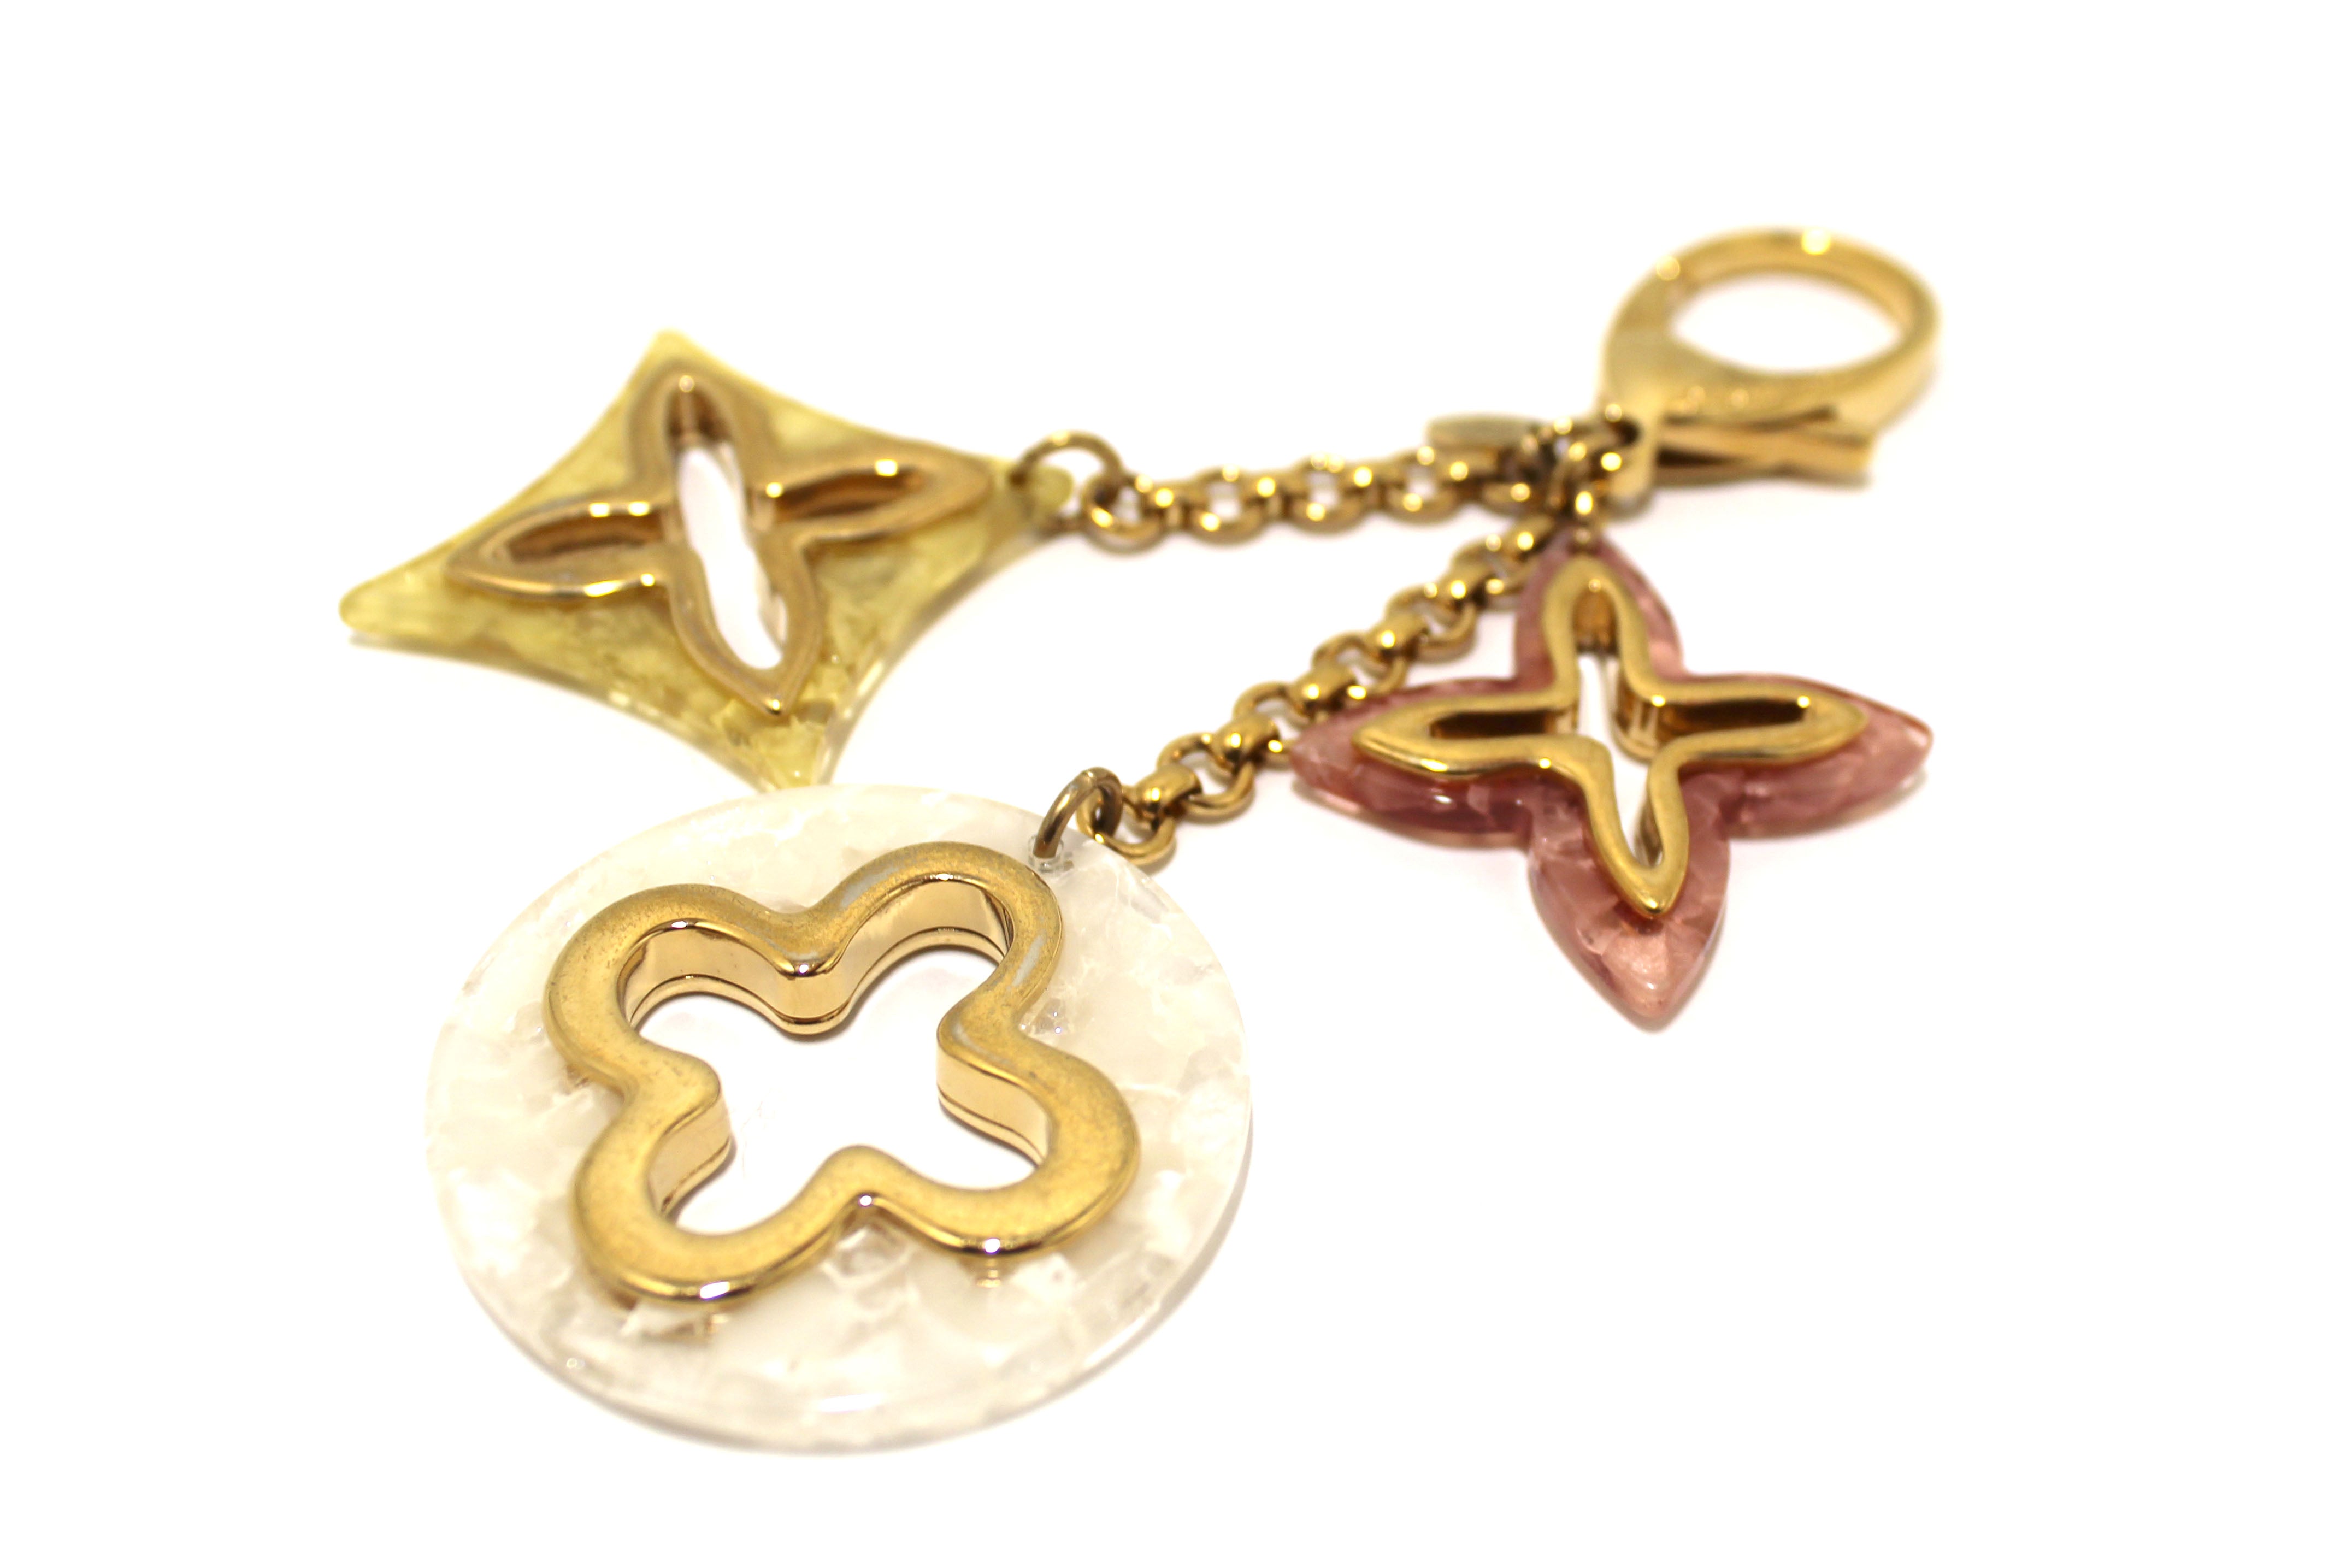 Louis Vuitton Fleur de Monogram Bag Charm and Key Holder Resin and Brass (Authentic Pre-Owned)